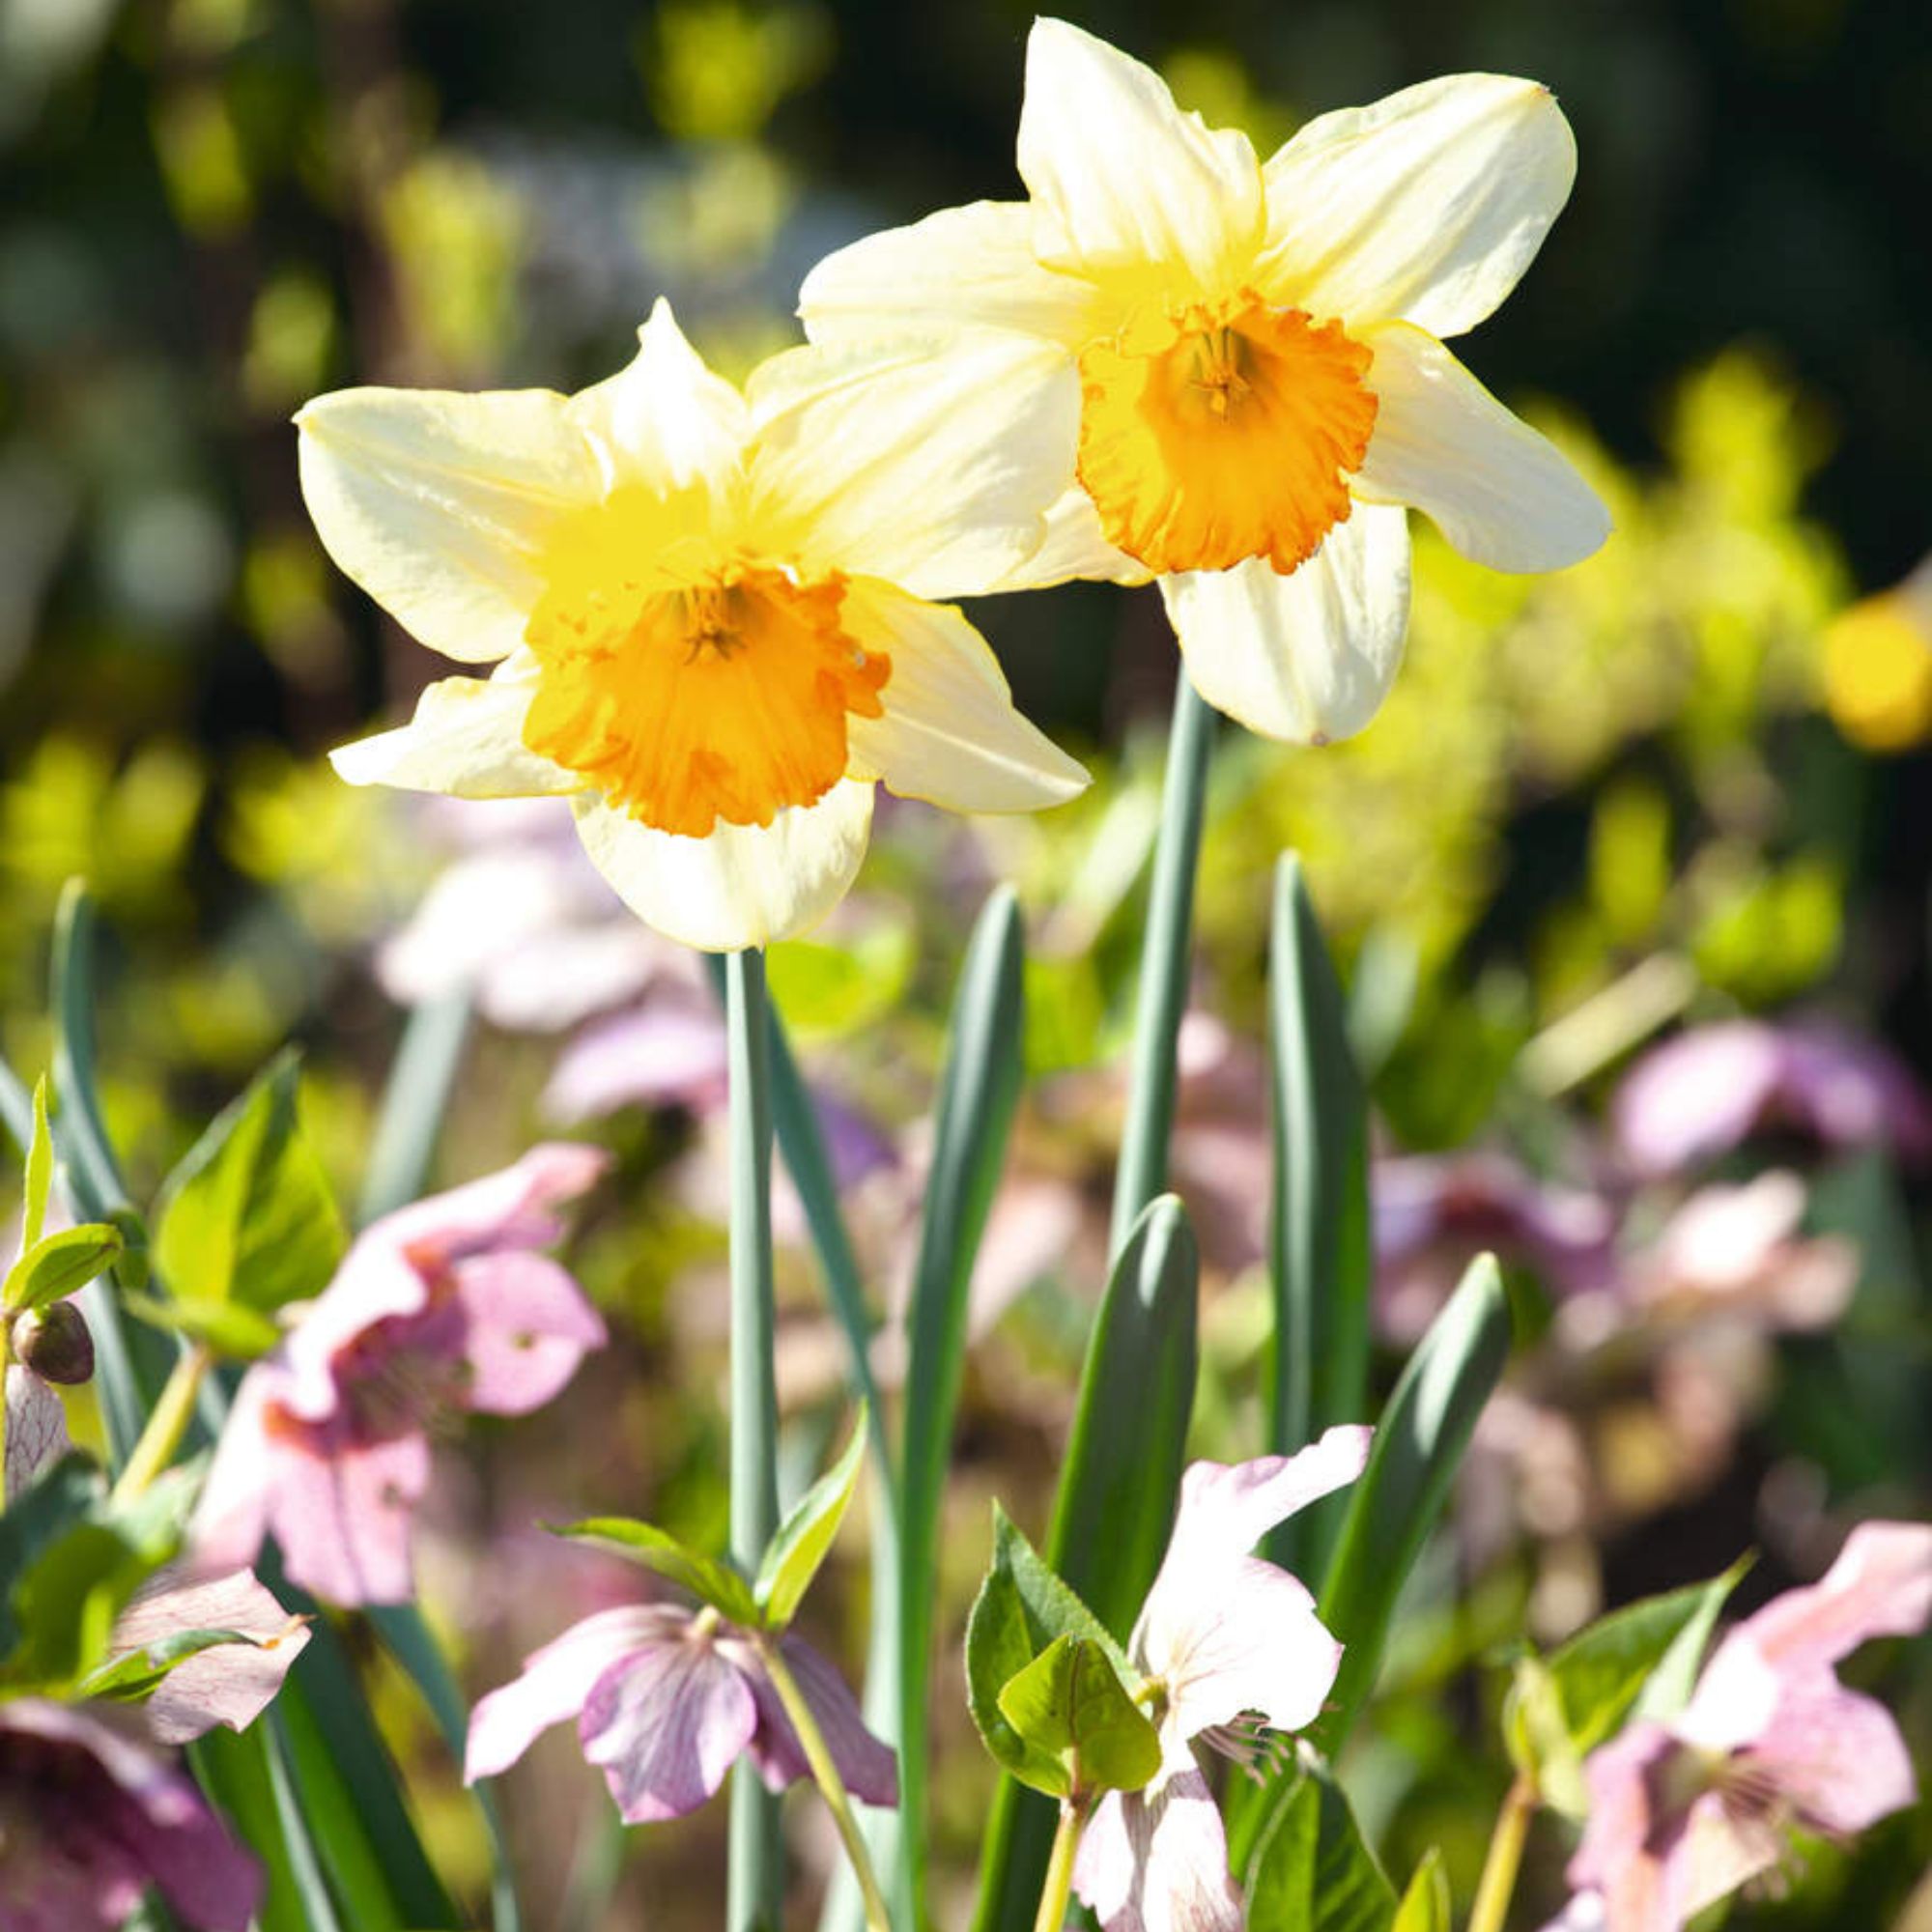 Pale daffodils and crocuses growing from bulbs in grass